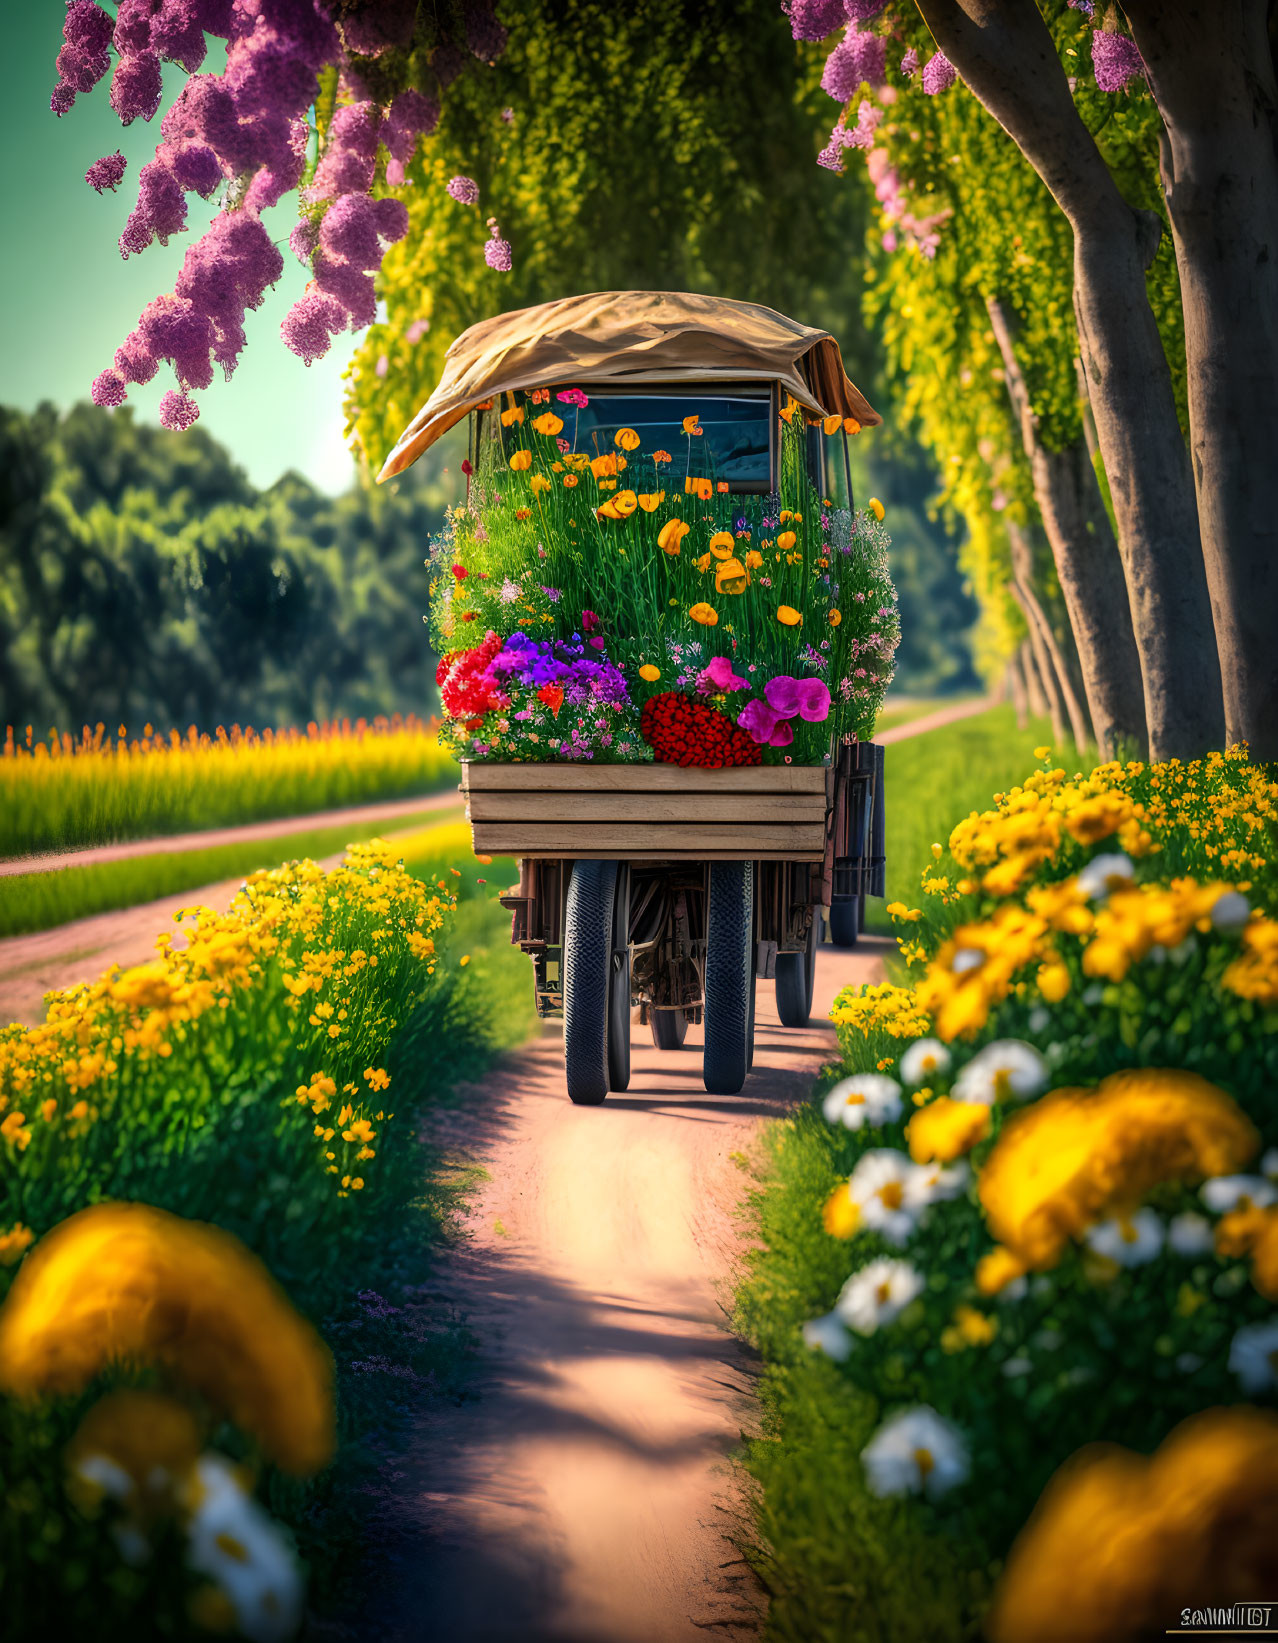 Colorful flower cart on serene pathway with lush trees